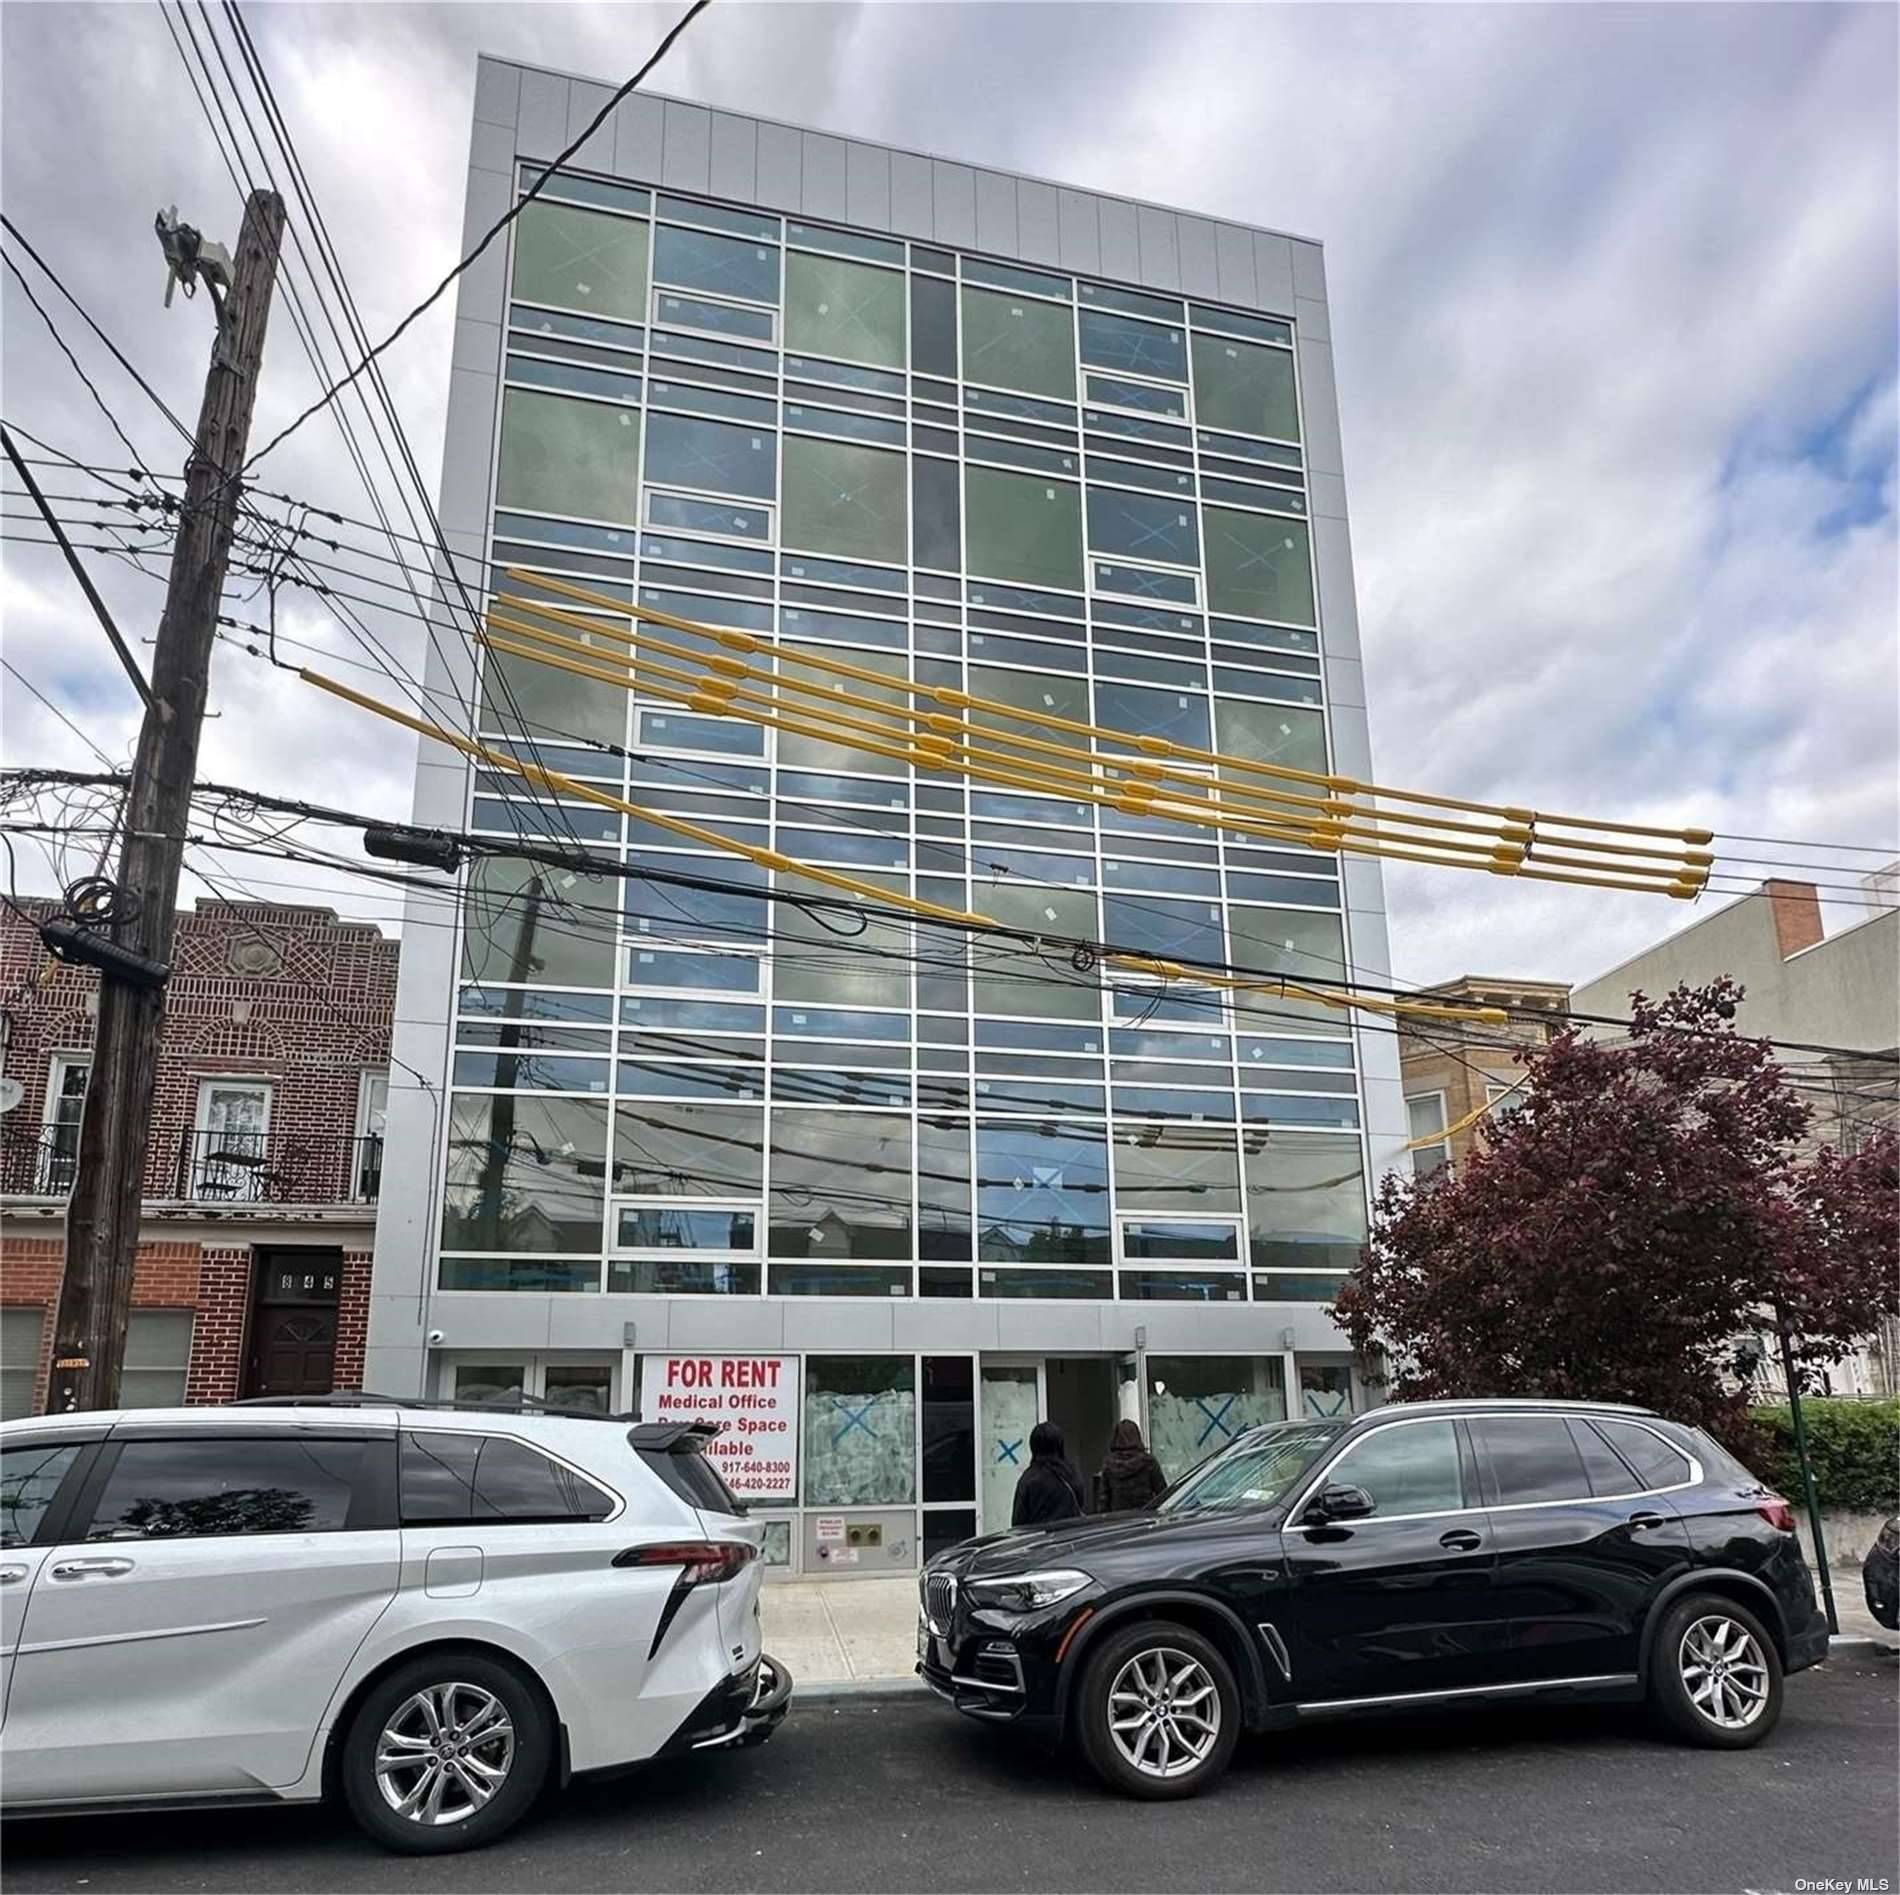 Discover an exceptional opportunity to own a brand new, impeccably constructed commercial building in the highly sought after Sunset Park area.